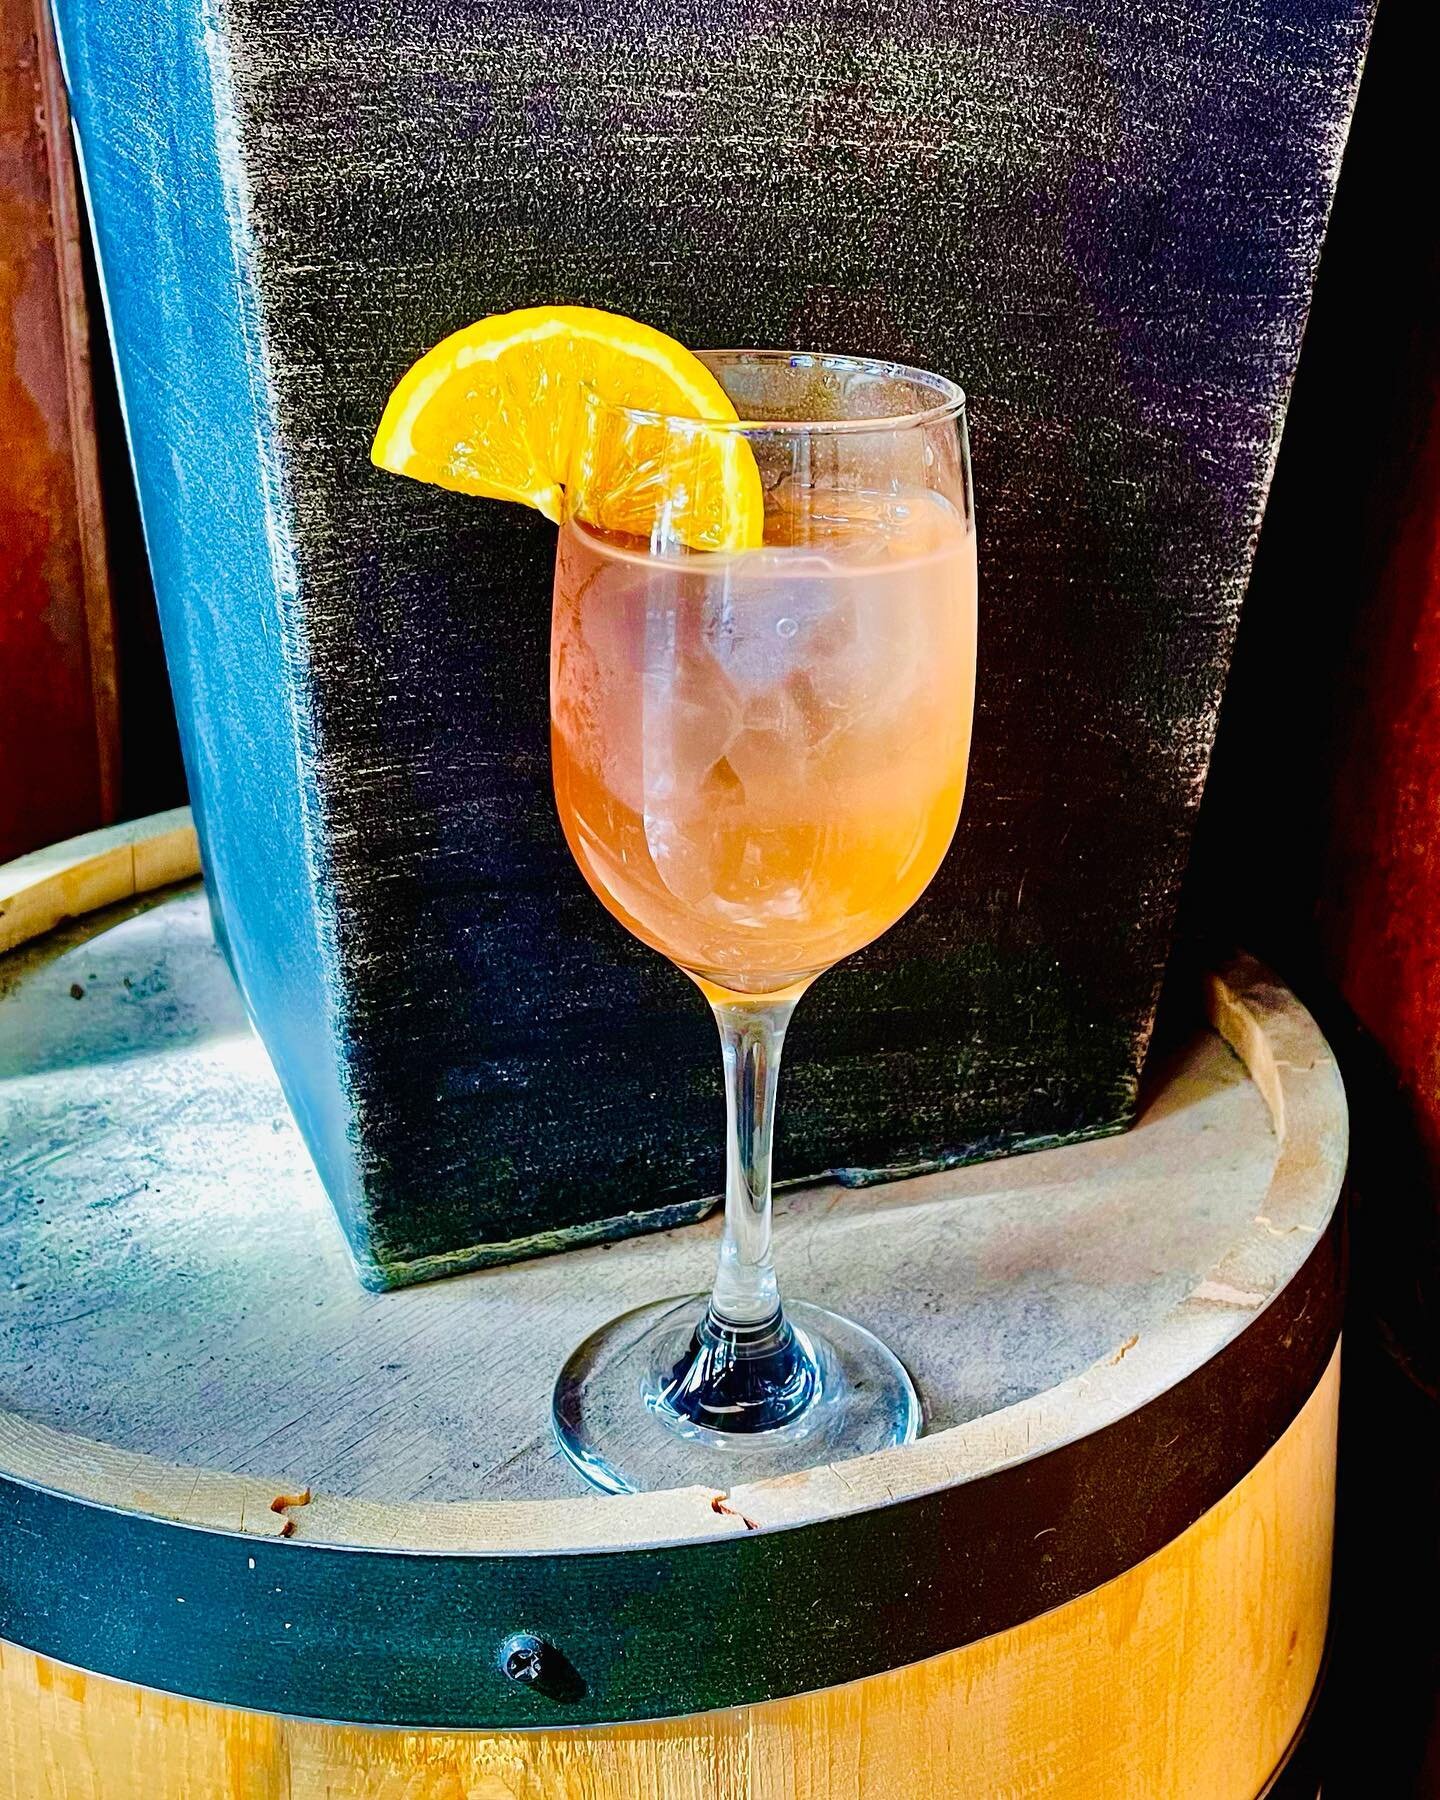 Saturdays in the Summer are for sangria! Every weekend we will have a different type of Sangria on special.  Celebrate Summer with a refreshing glass of homemade sangria!
#craftcocktails #craftbeer #sangria #craftwhiskey #localbusiness #mixology